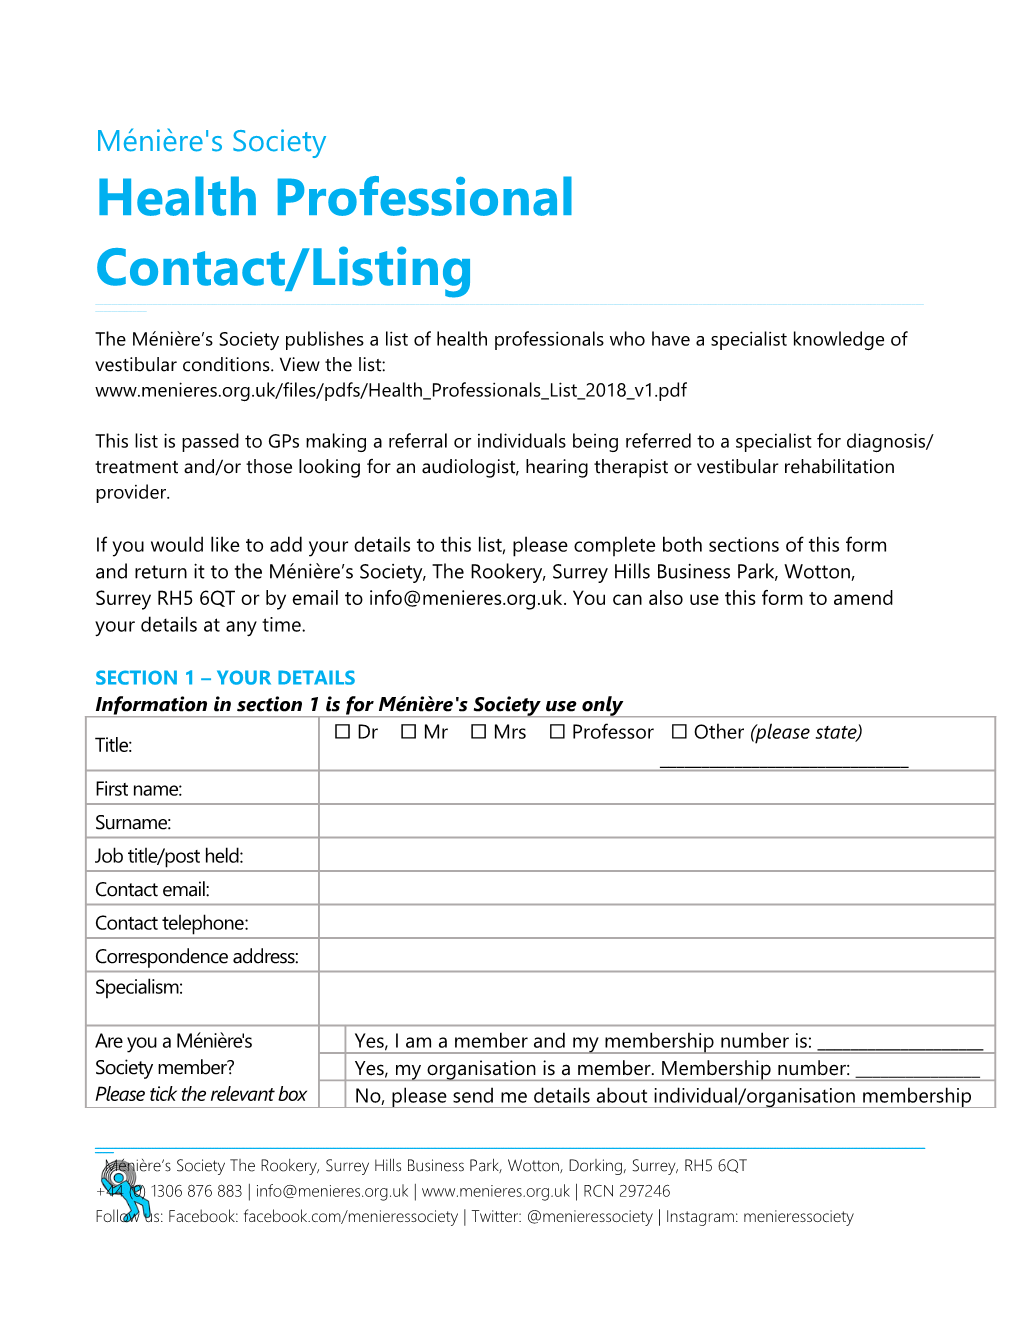 Health Professional Contact/Listing